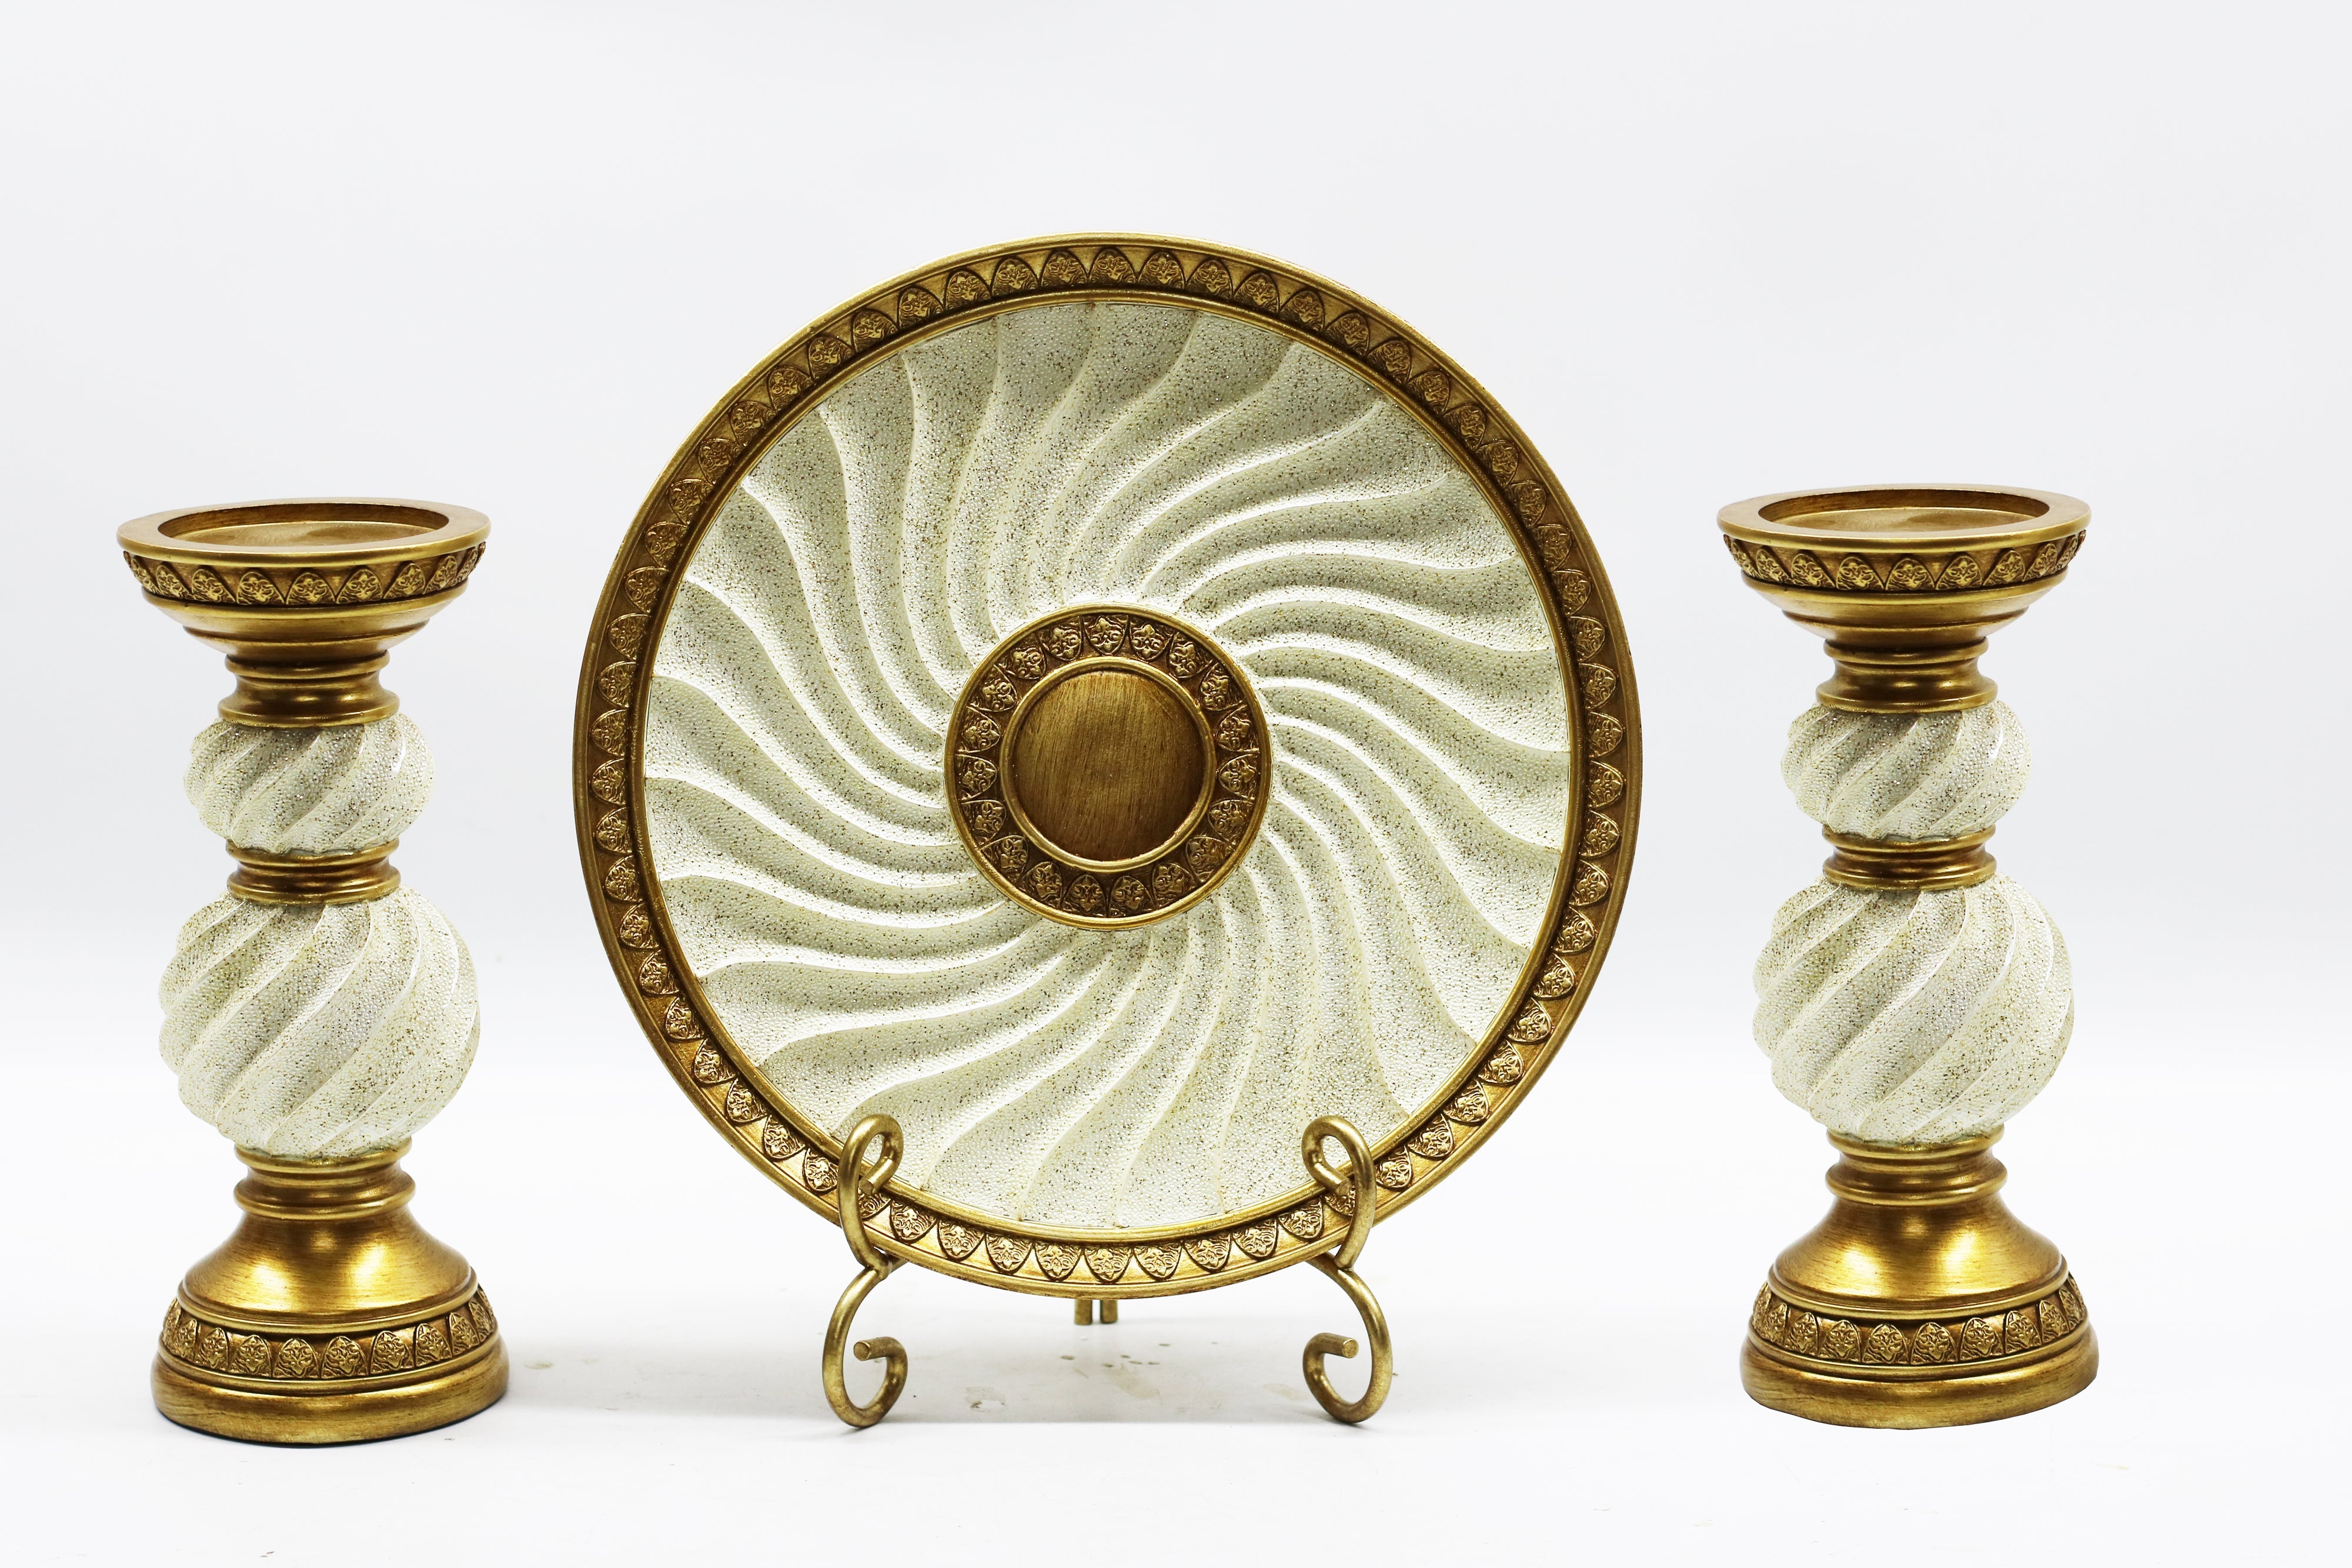 Decorative Plate with Candlesticks